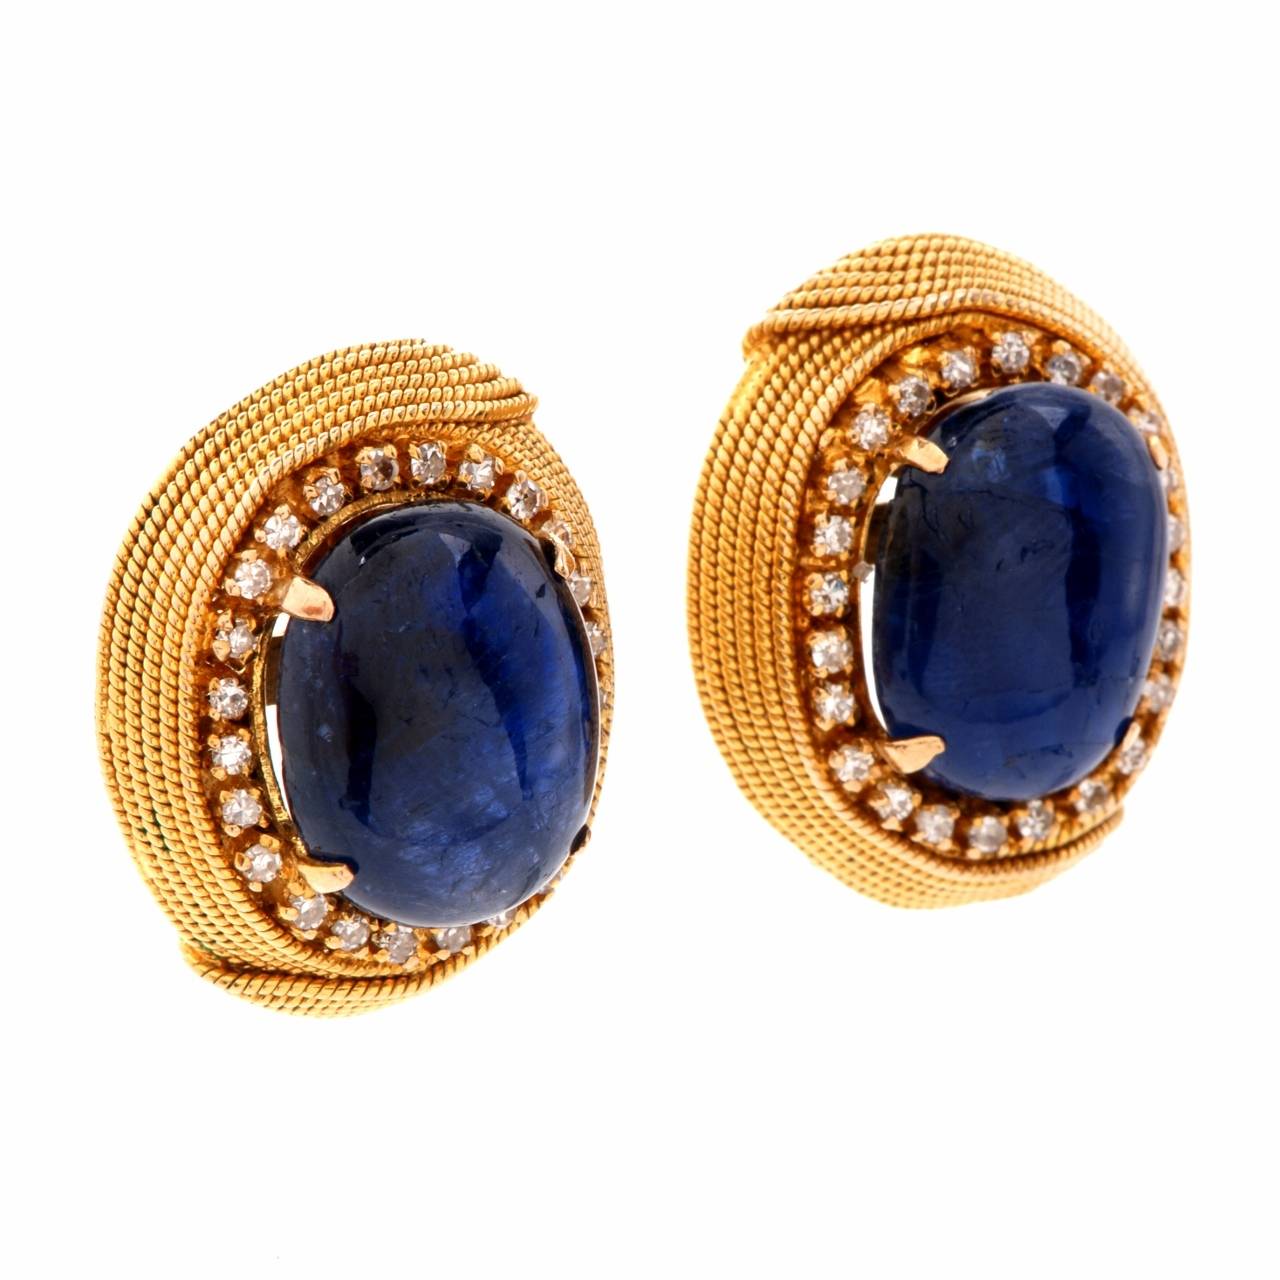 These estate Retro earrings of classic distinction and aesthetic beauty are crafted in solid 18K yellow gold, weigh 19.00 grams and measure 23 mm x 18 mm.  Designed as  artfully crafted oval plaques, these captivating earrings expose a pair of